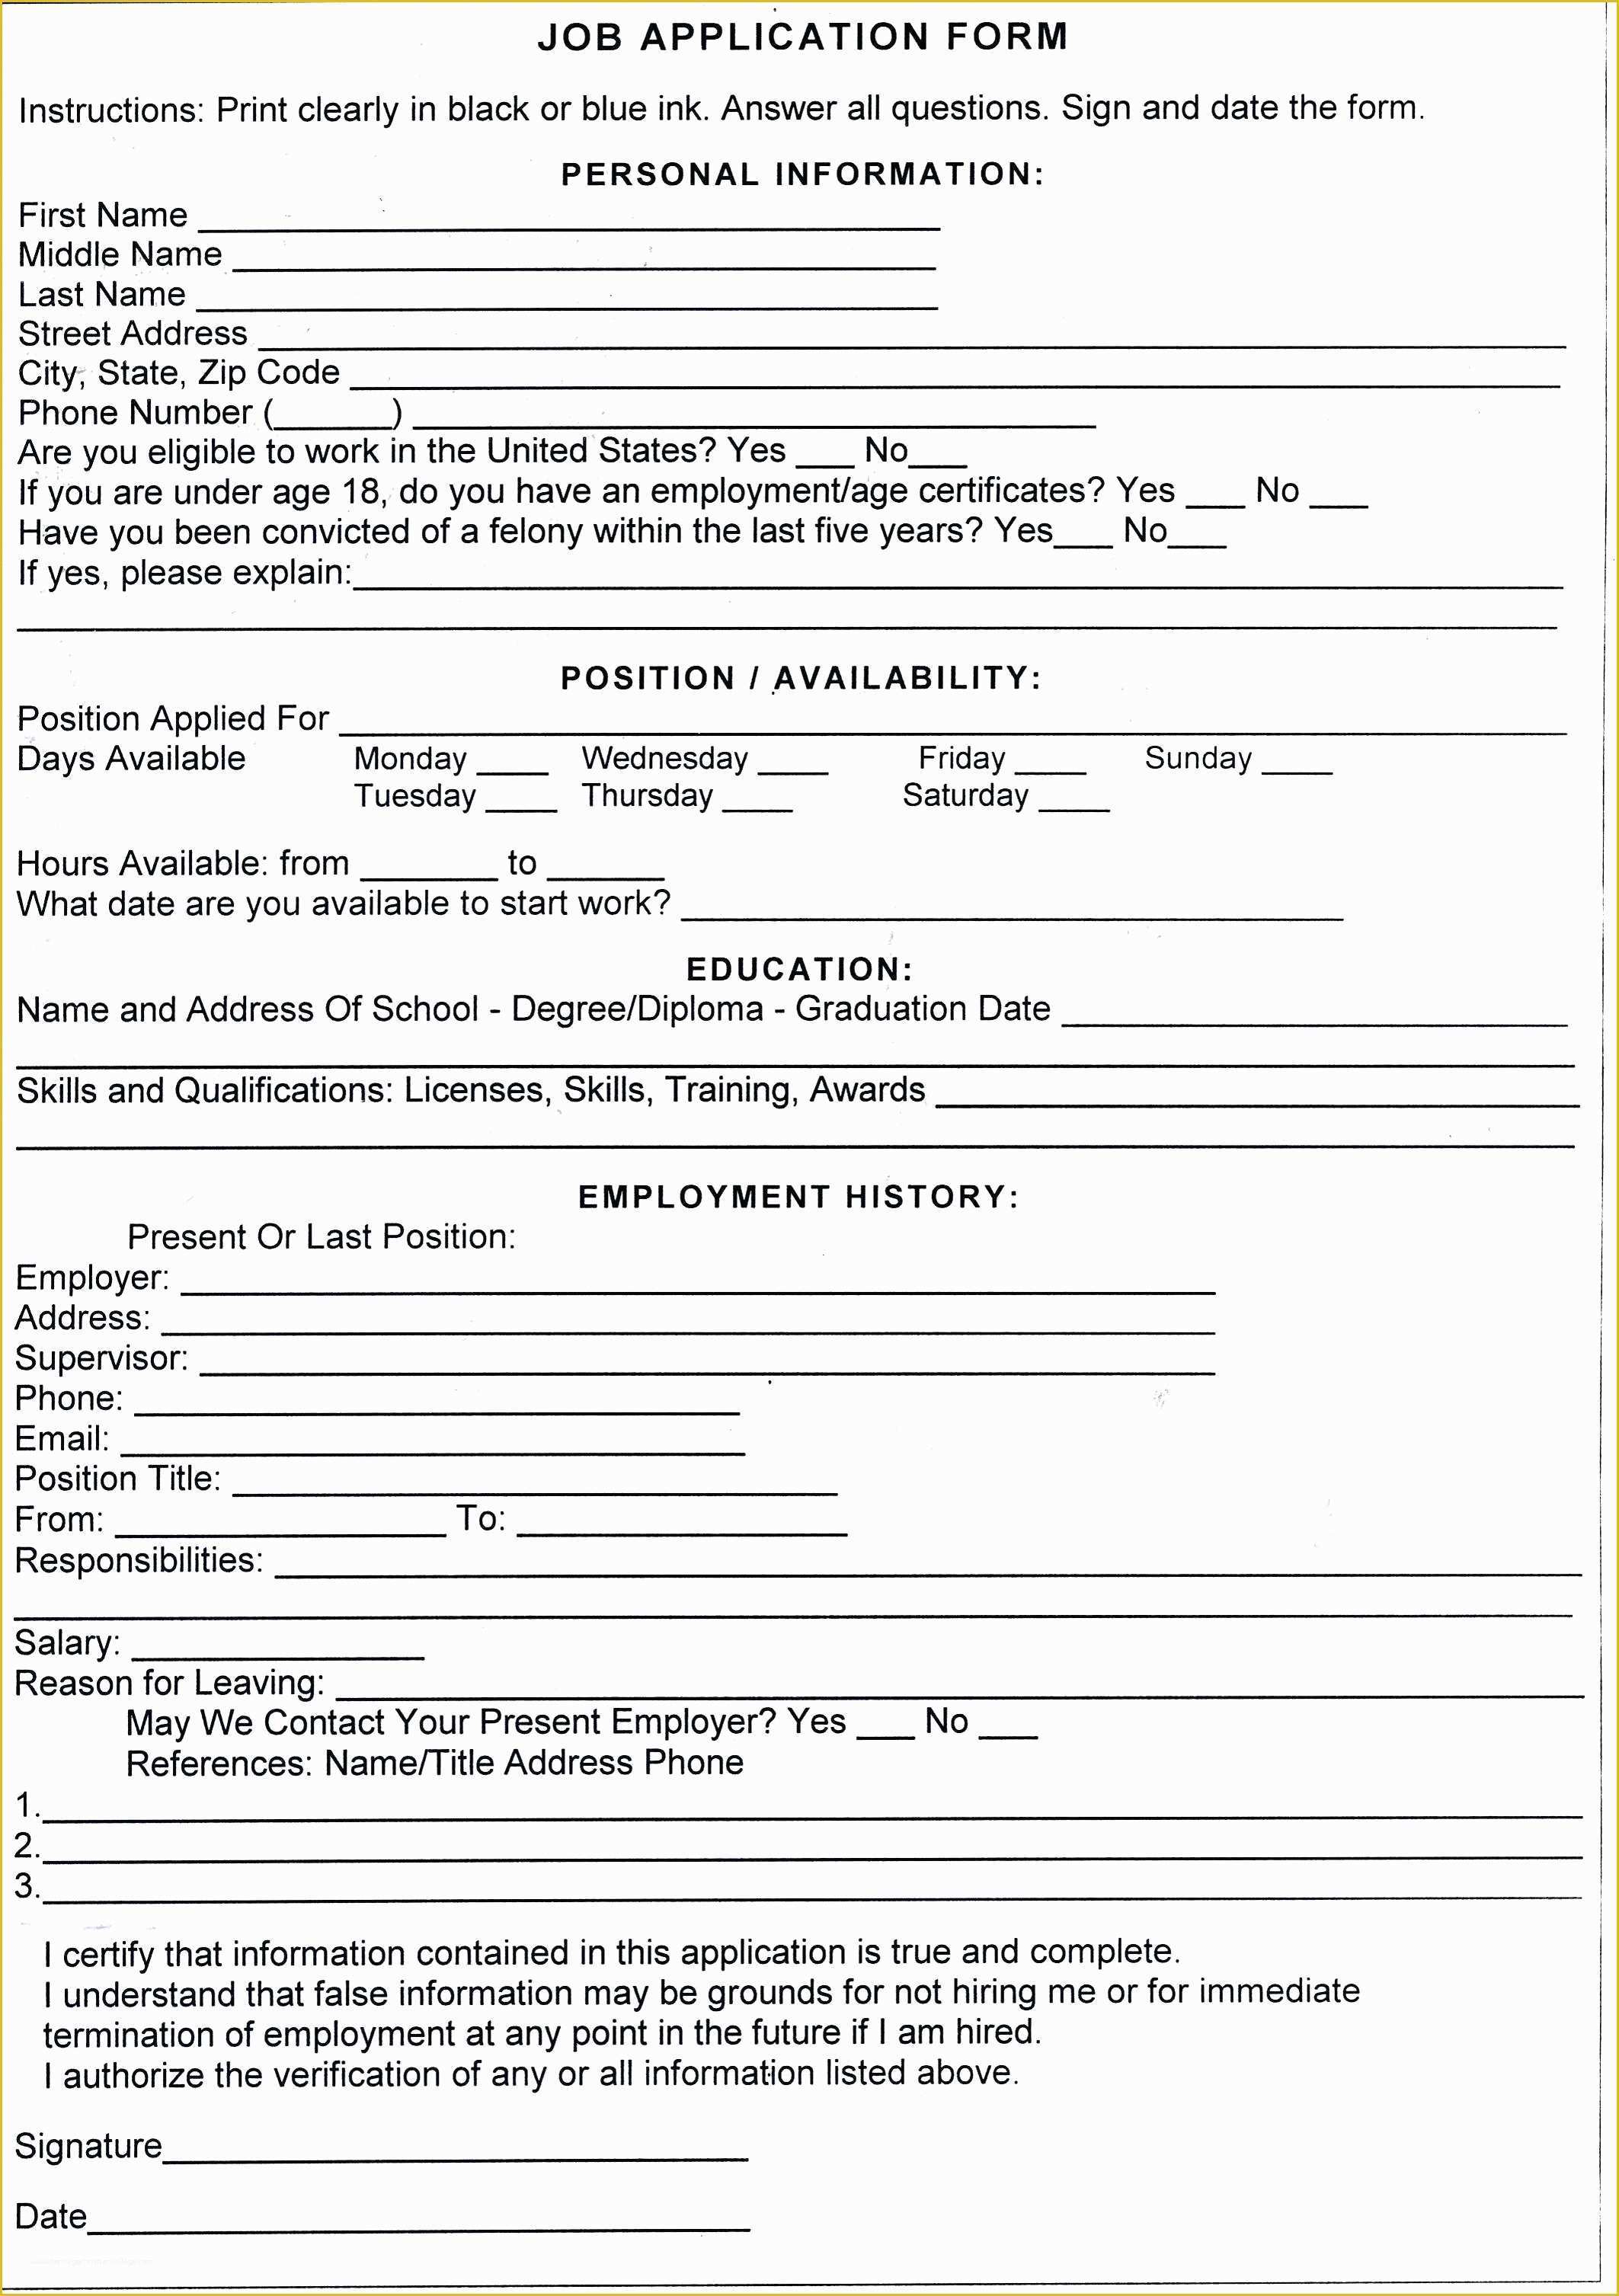 Termination form Template Free Of Template Termination Employment form Template